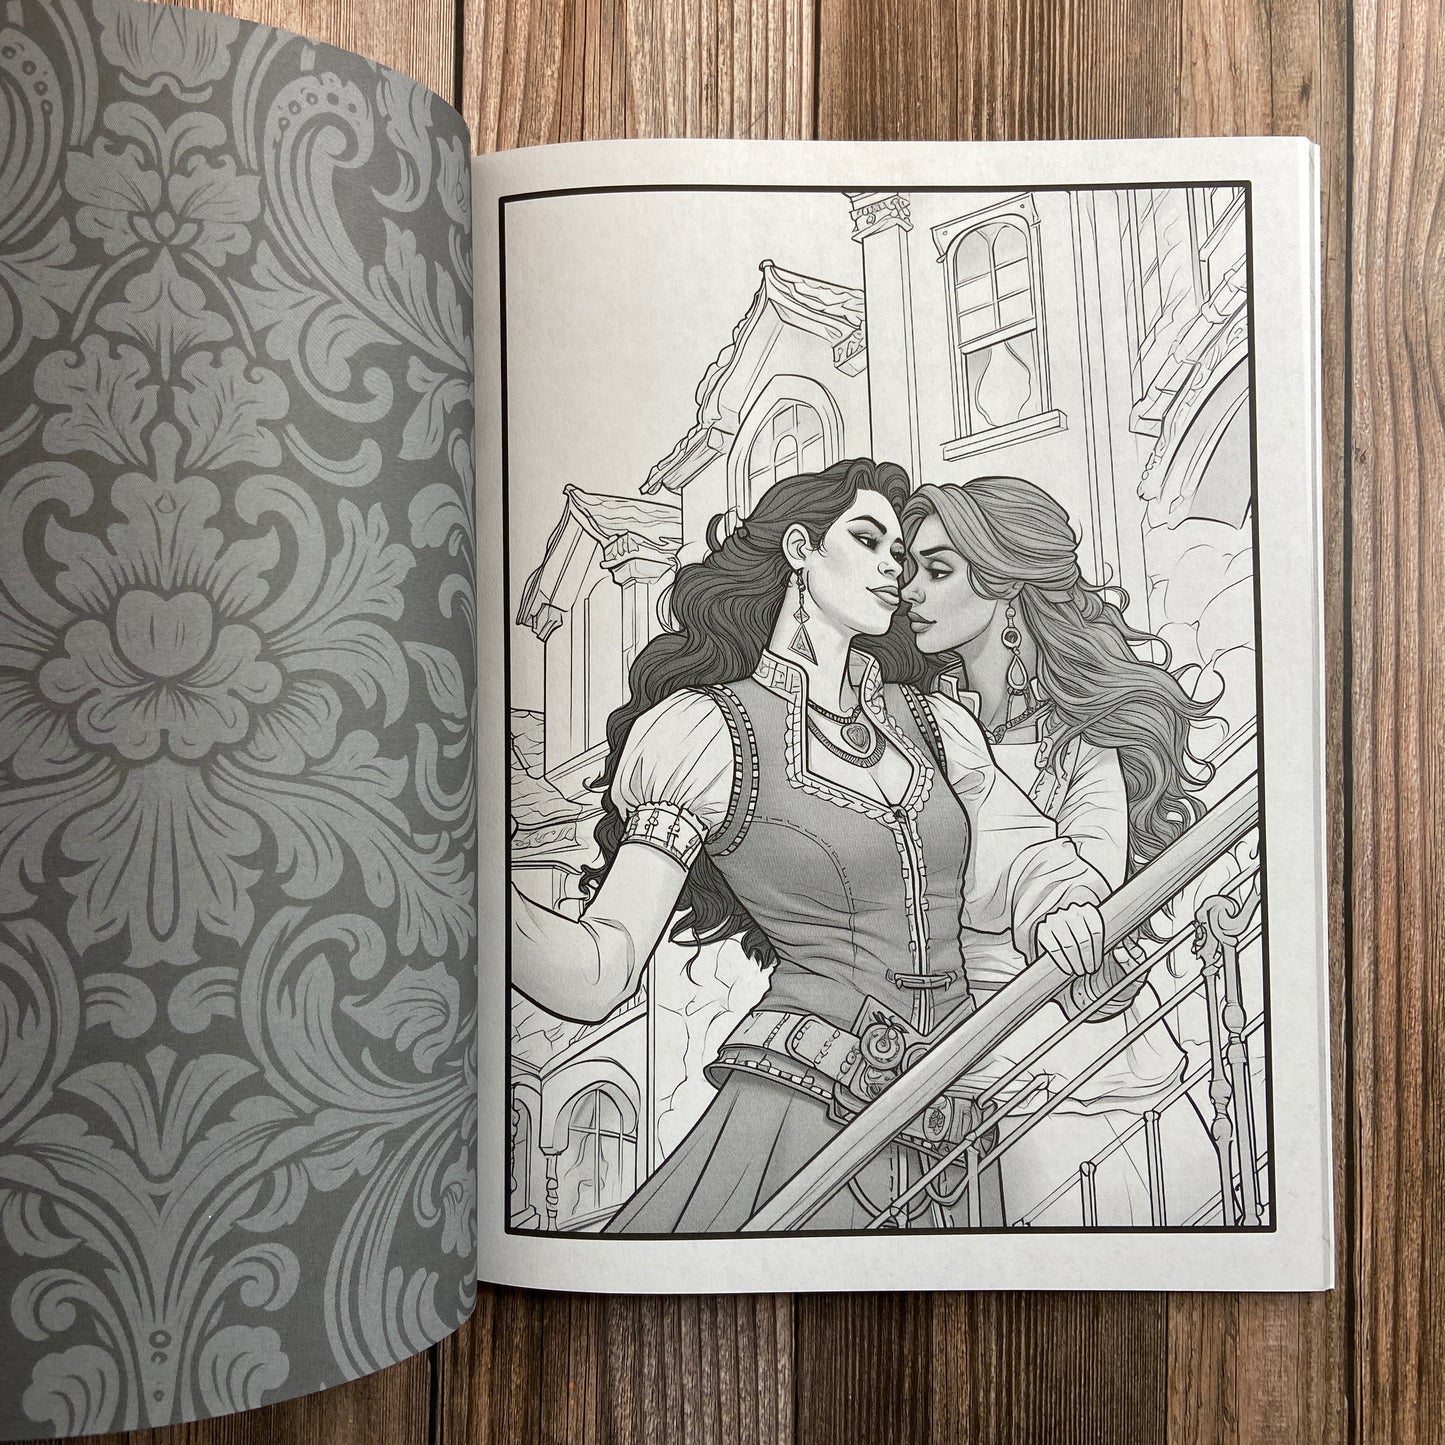 A N.C. Starshadow Sapphic Pirate coloring book with two women on the cover.